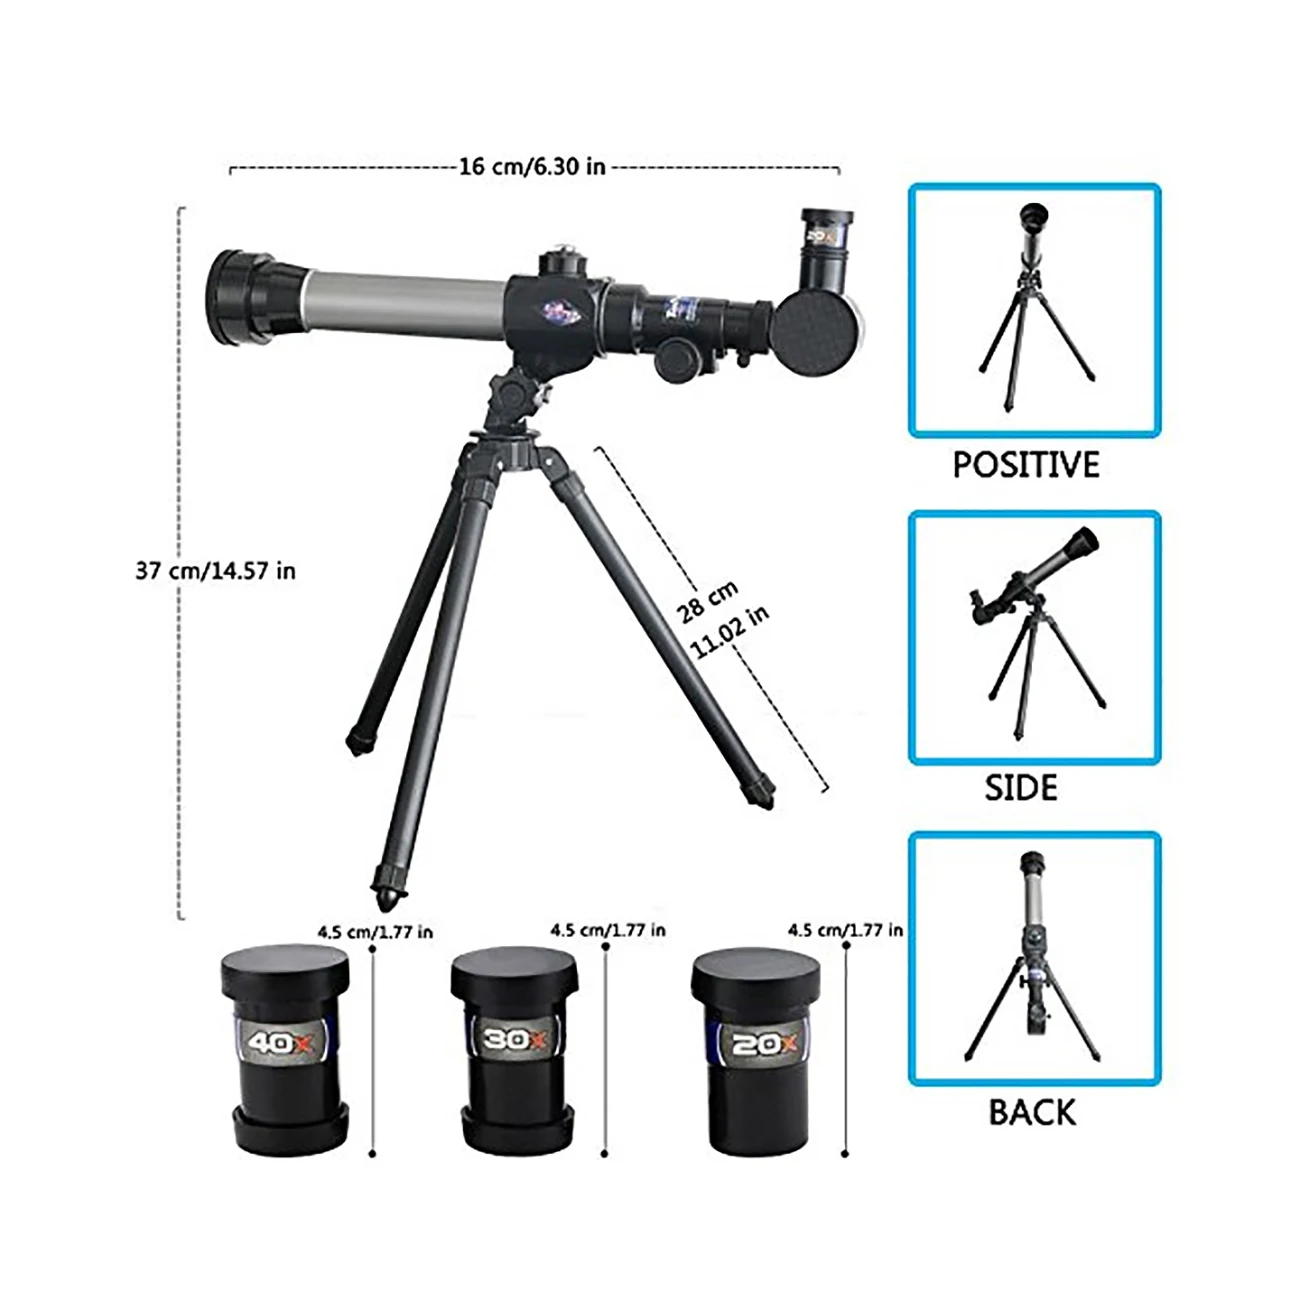 

20X 30X 40X Refractor Science Educational Astronomical Telescope Monocular With Tripod For Children Observation Scope Kids Toys